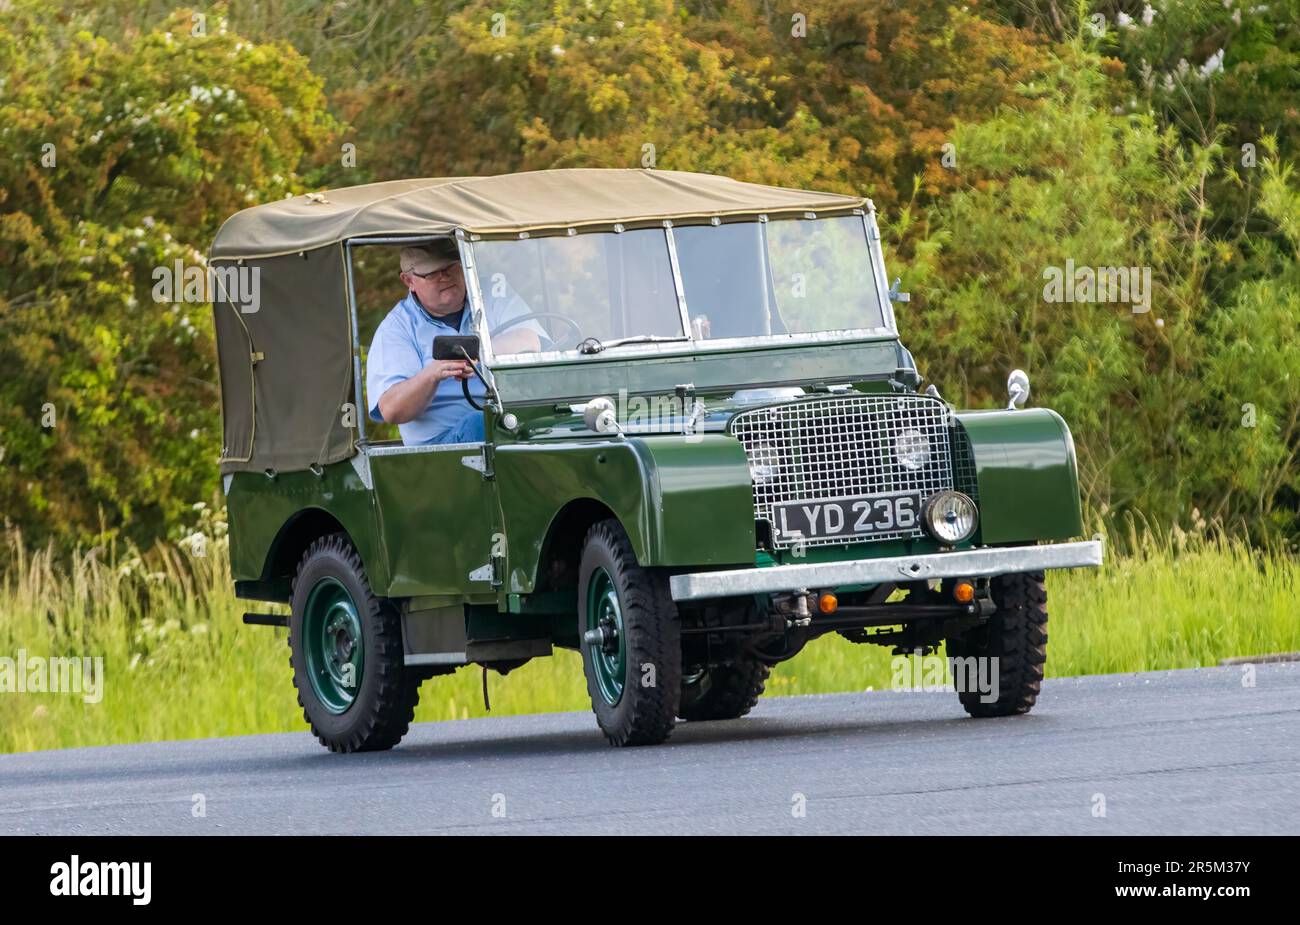 Stony Stratford,UK - June 4th 2023: 1950 green LAND ROVER SERIES 1 classic car travelling on an English country road. Stock Photo